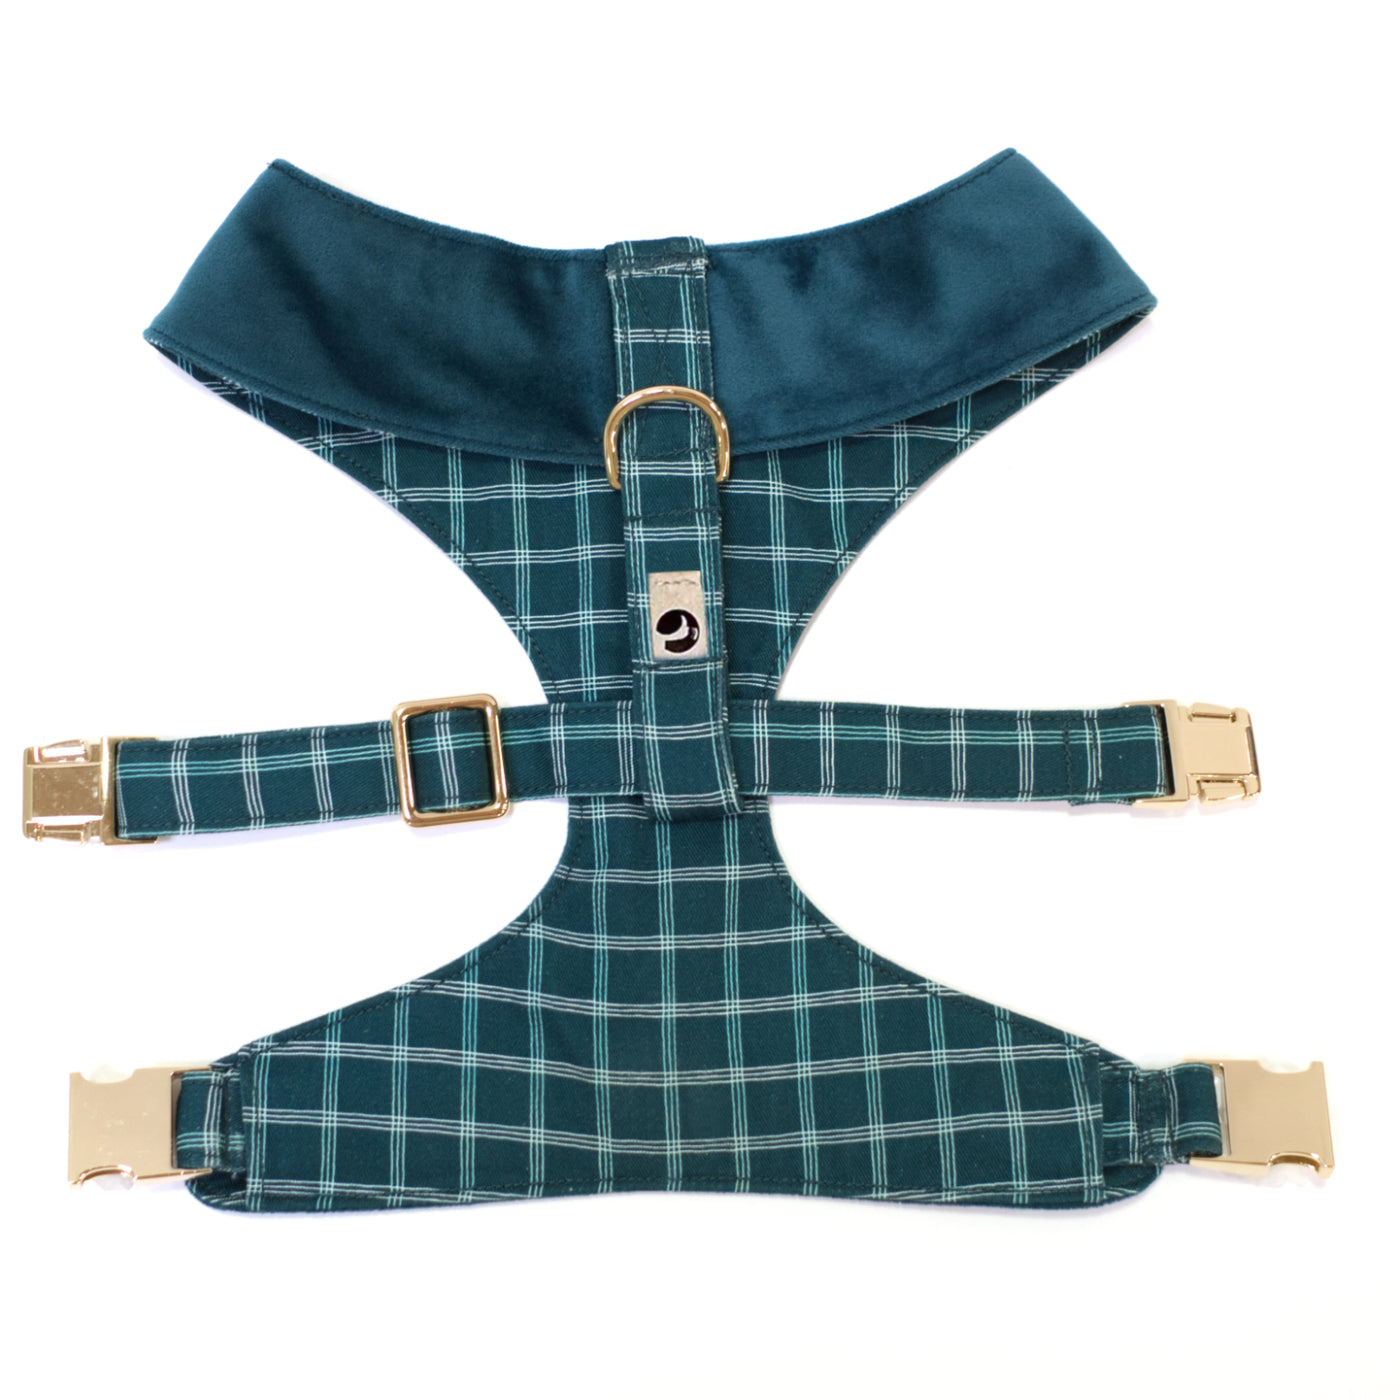 Reversible dog harness of teal velvet and windowpane plaid from top/back side